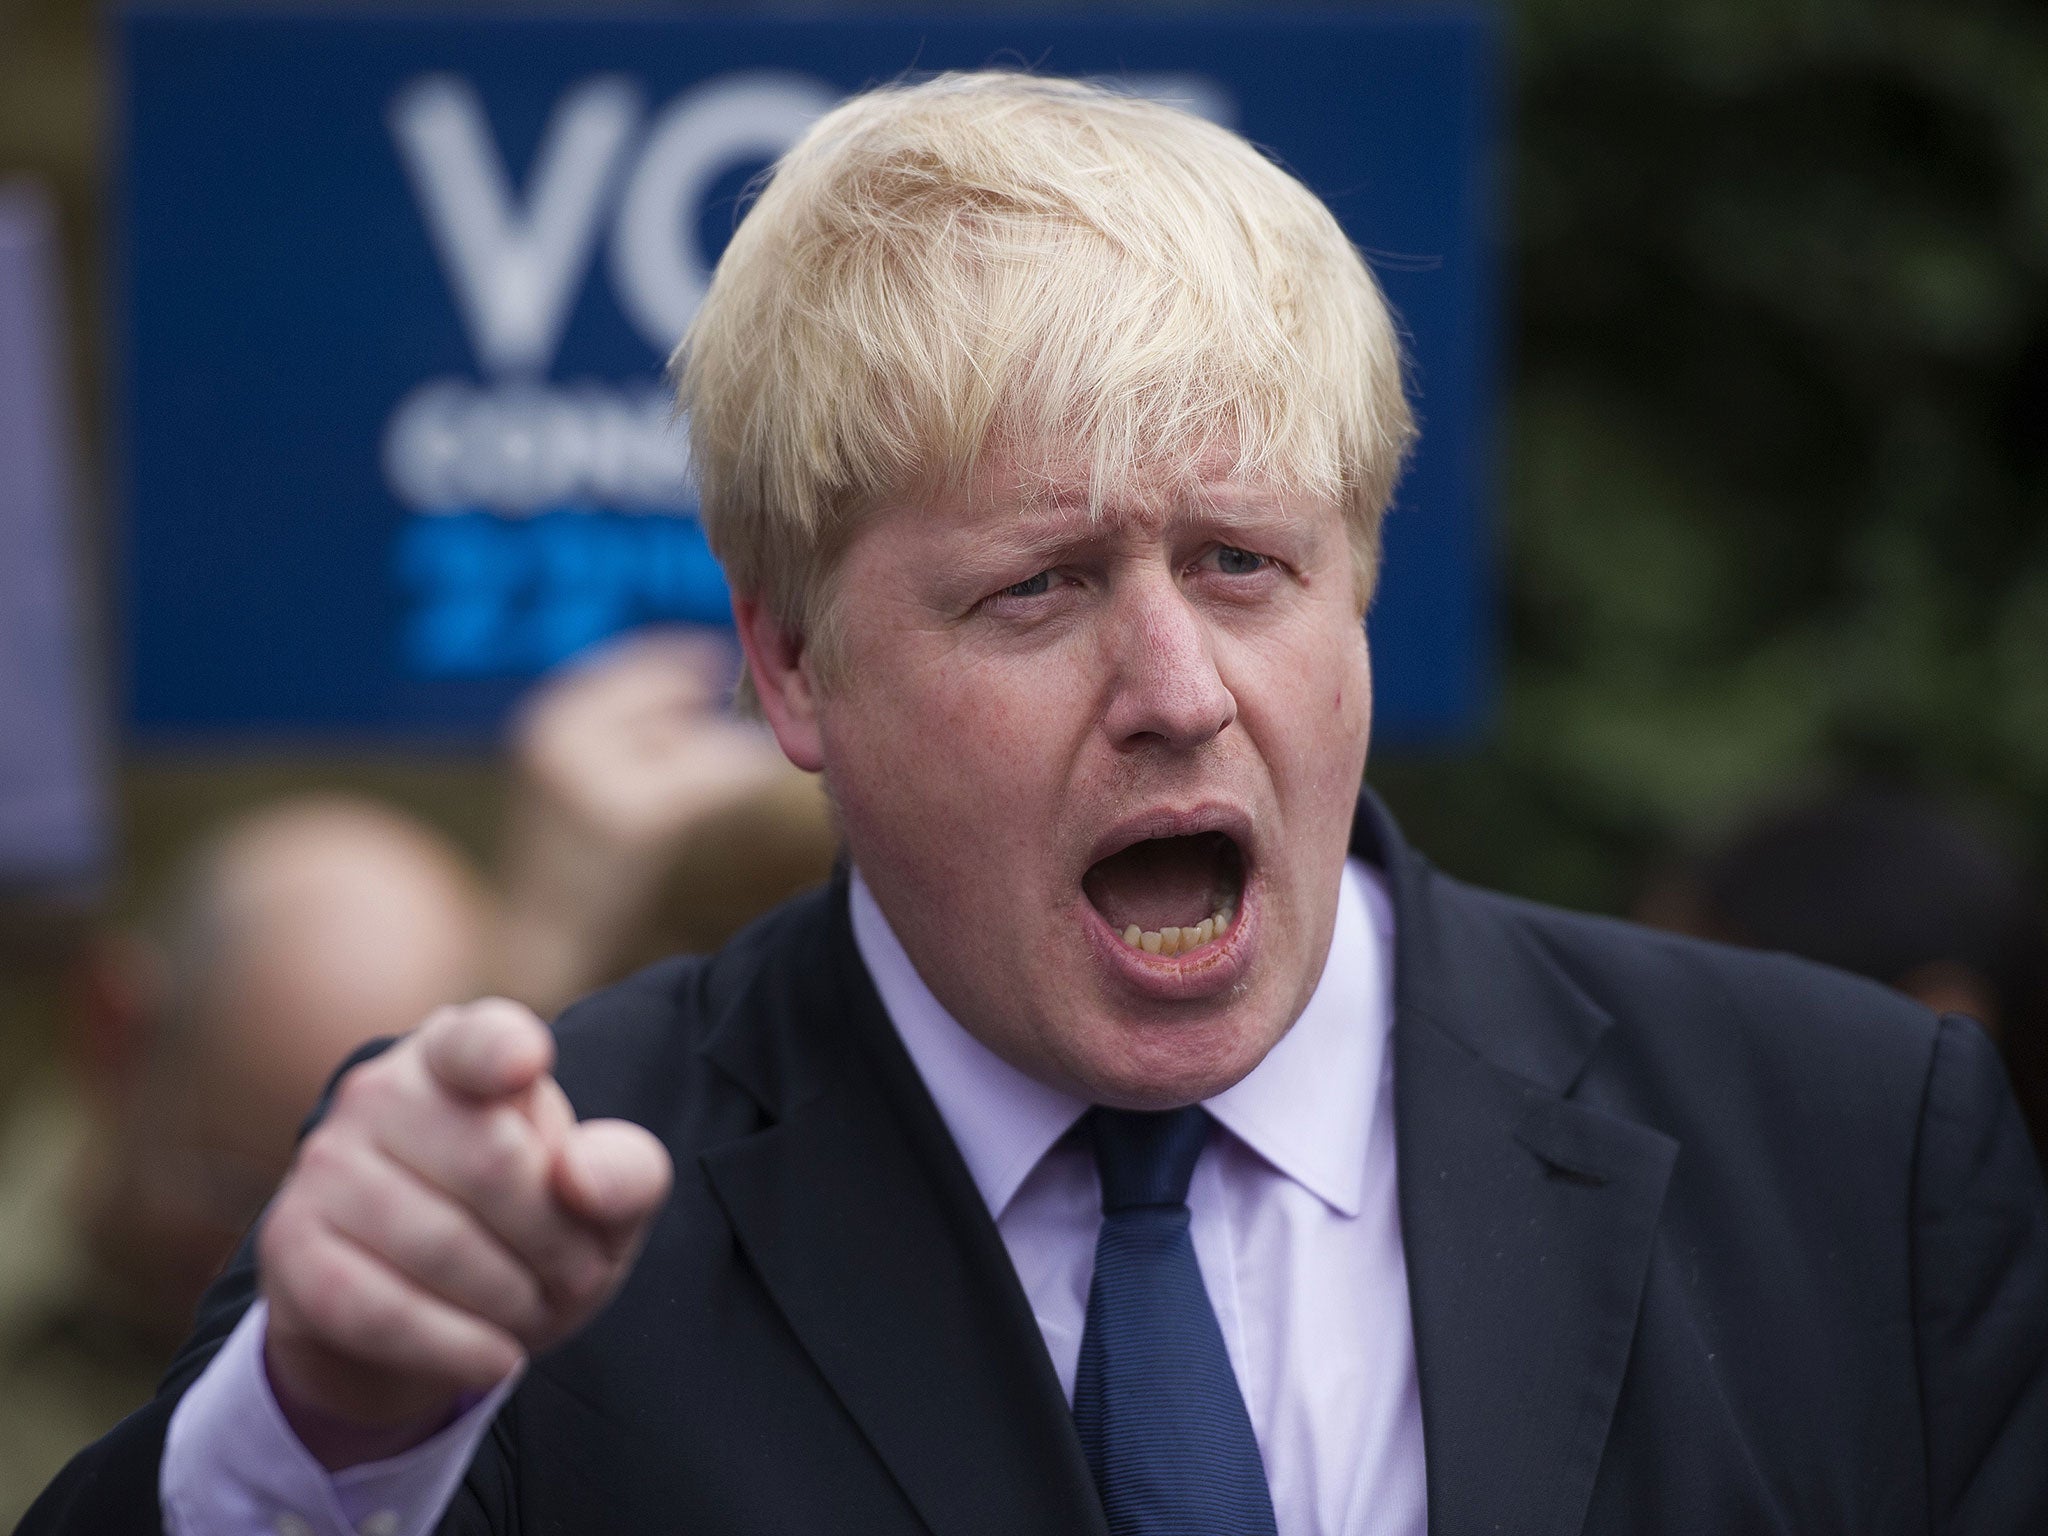 Boris Johnson launched an attack on Ukip supporters the night before Richard Barnes defected